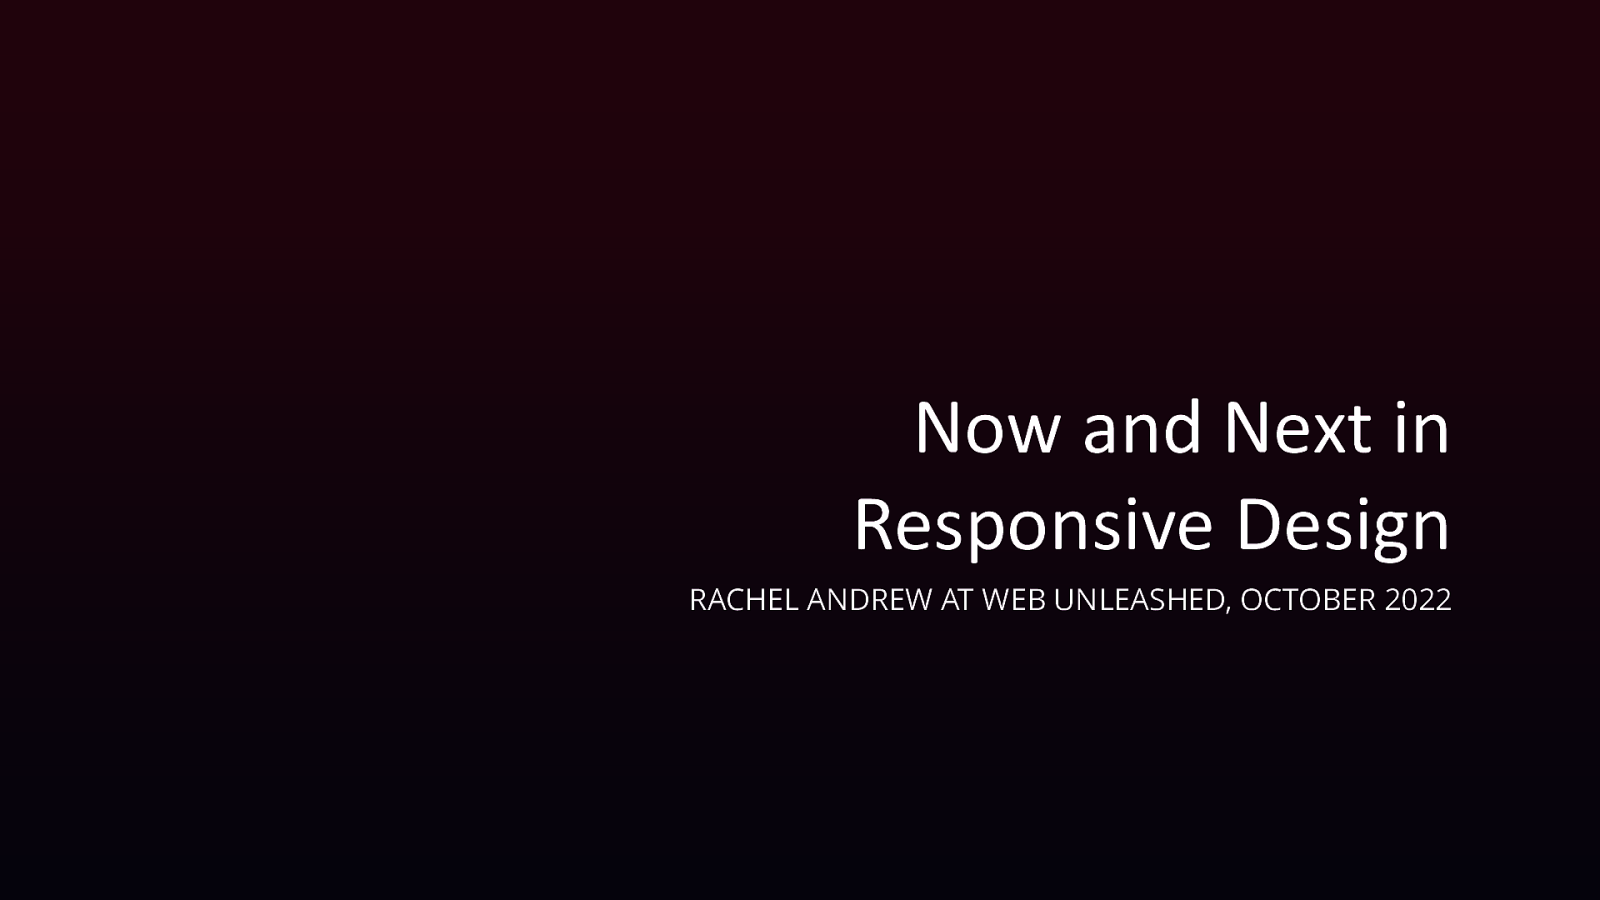 Now and Next in Responsive Design